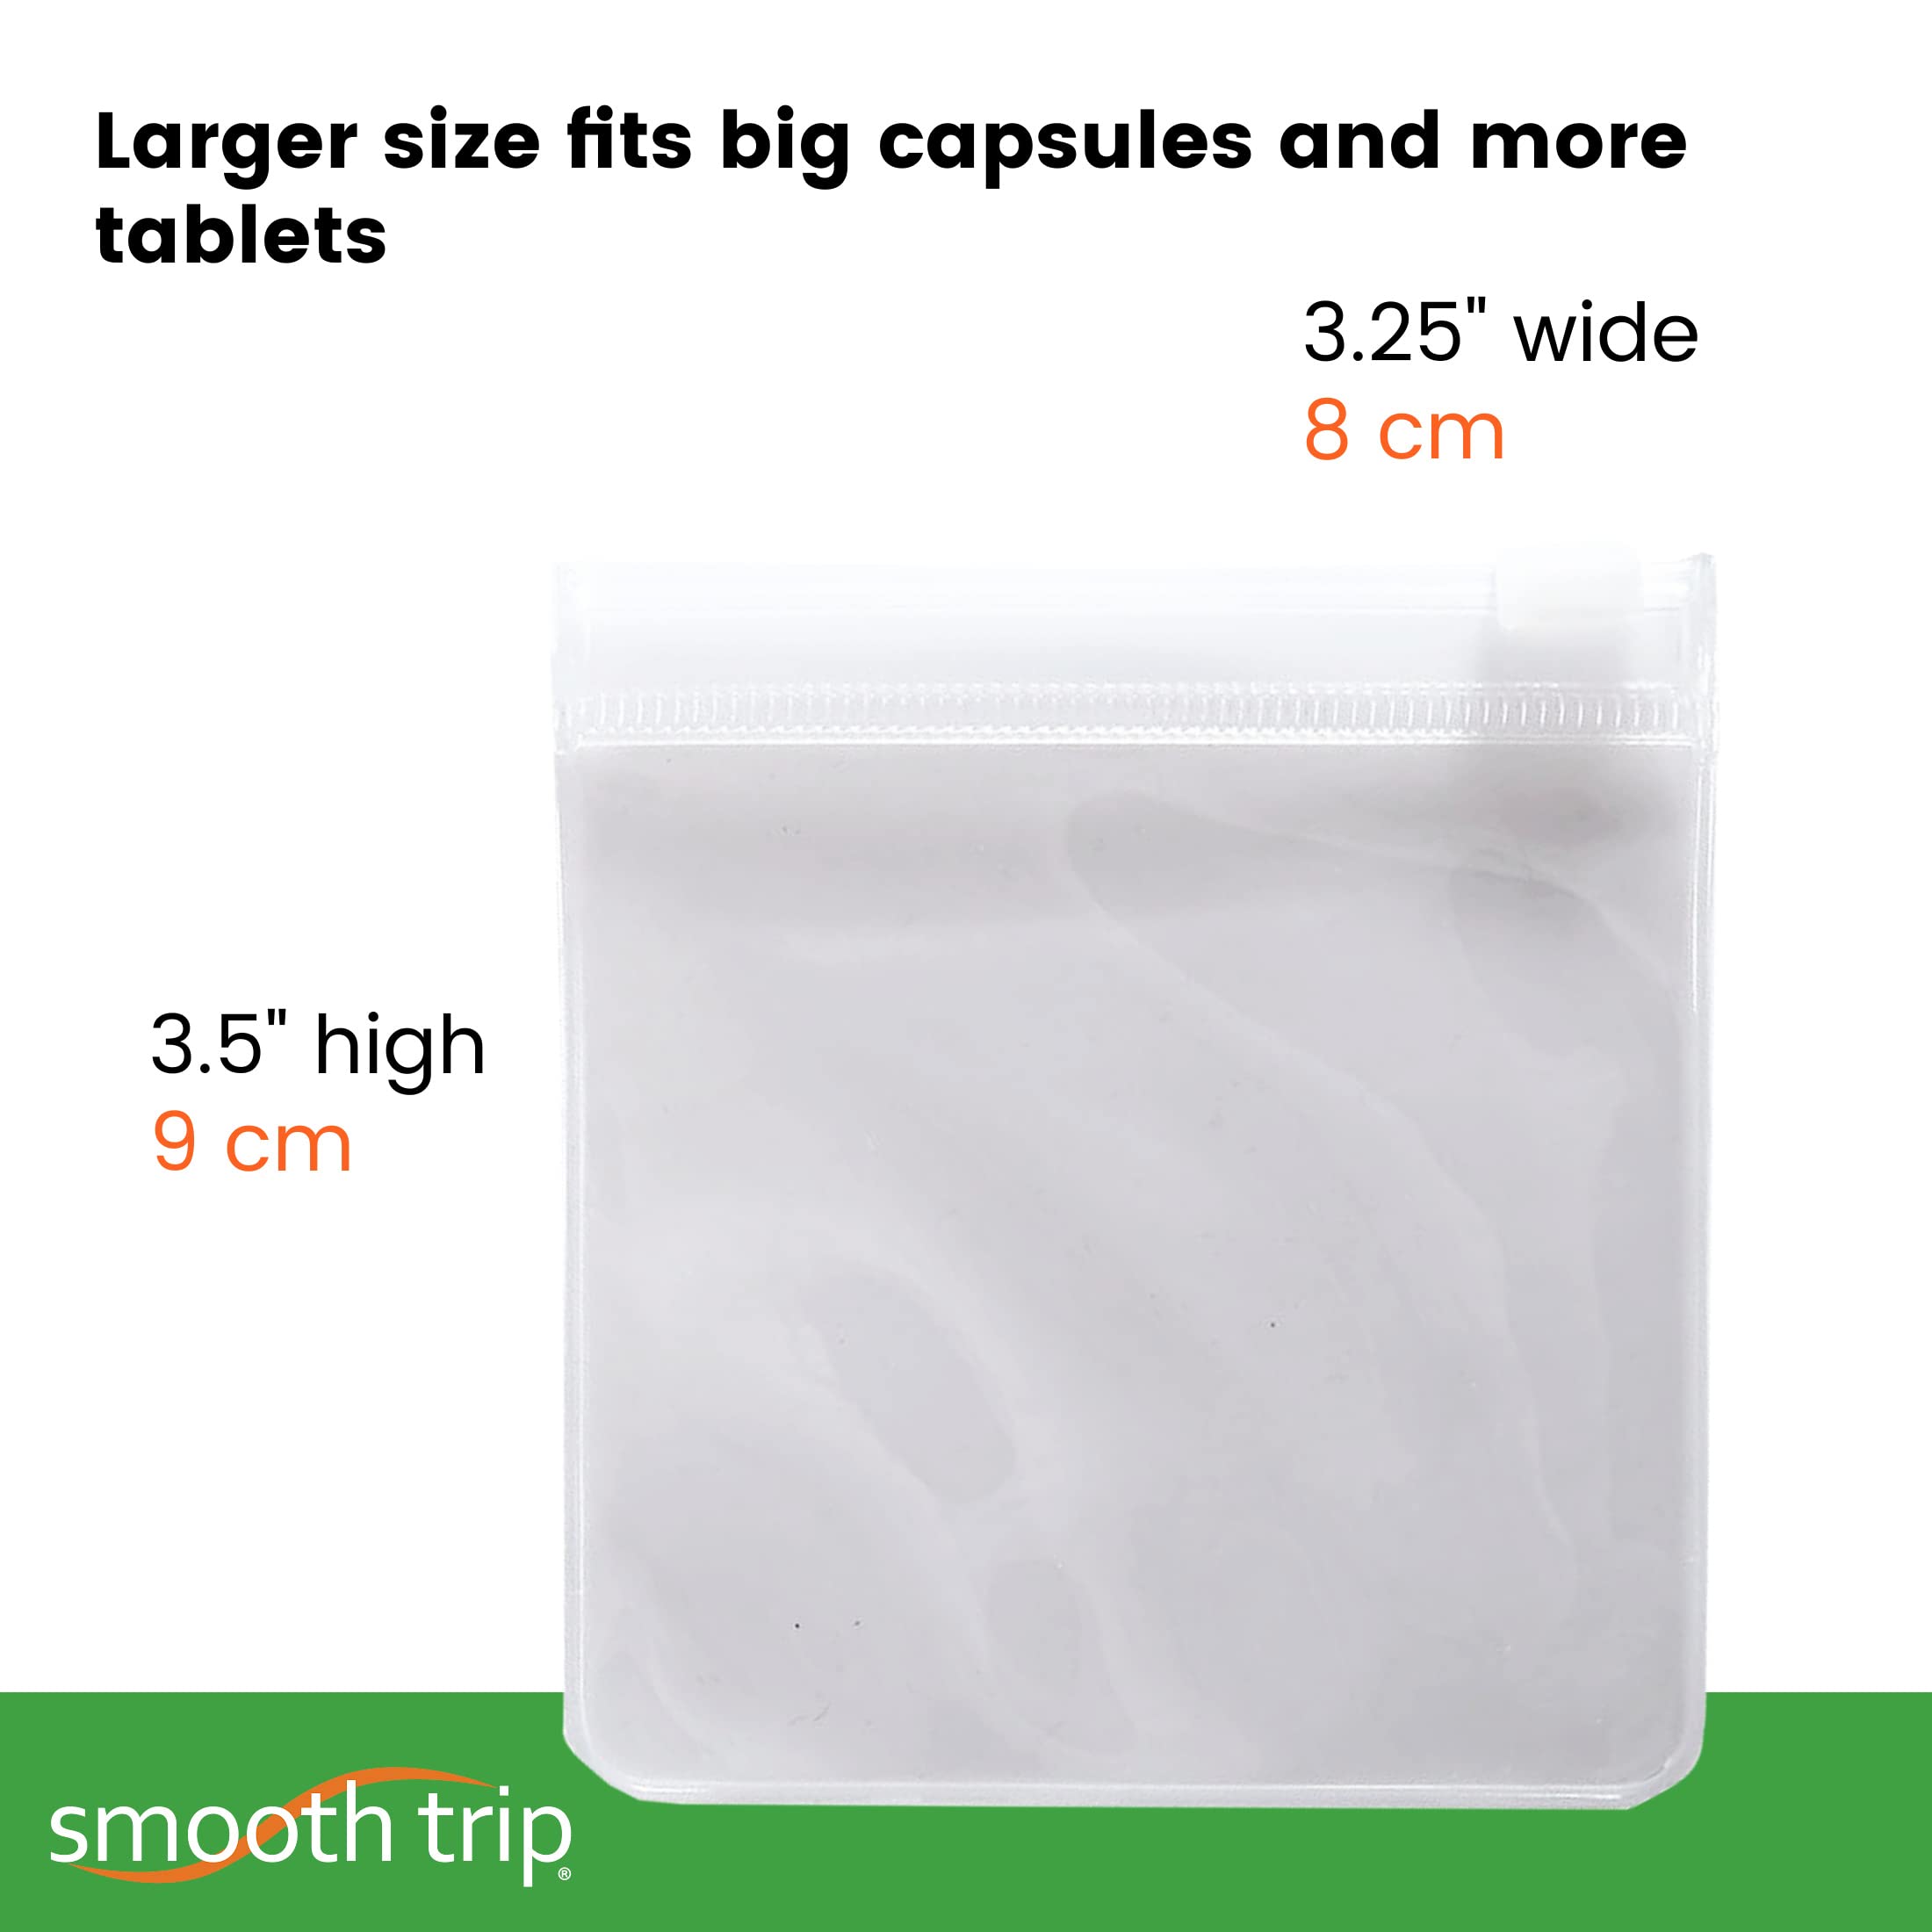 Smooth Trip Certified Food Grade Pill Pouch - Zippered Ultra Clear and Strong BPA Free Bags for Vitamins, Pills, Snacks and Accessories - Larger 3.25 x 3.5" Size (8-Count)